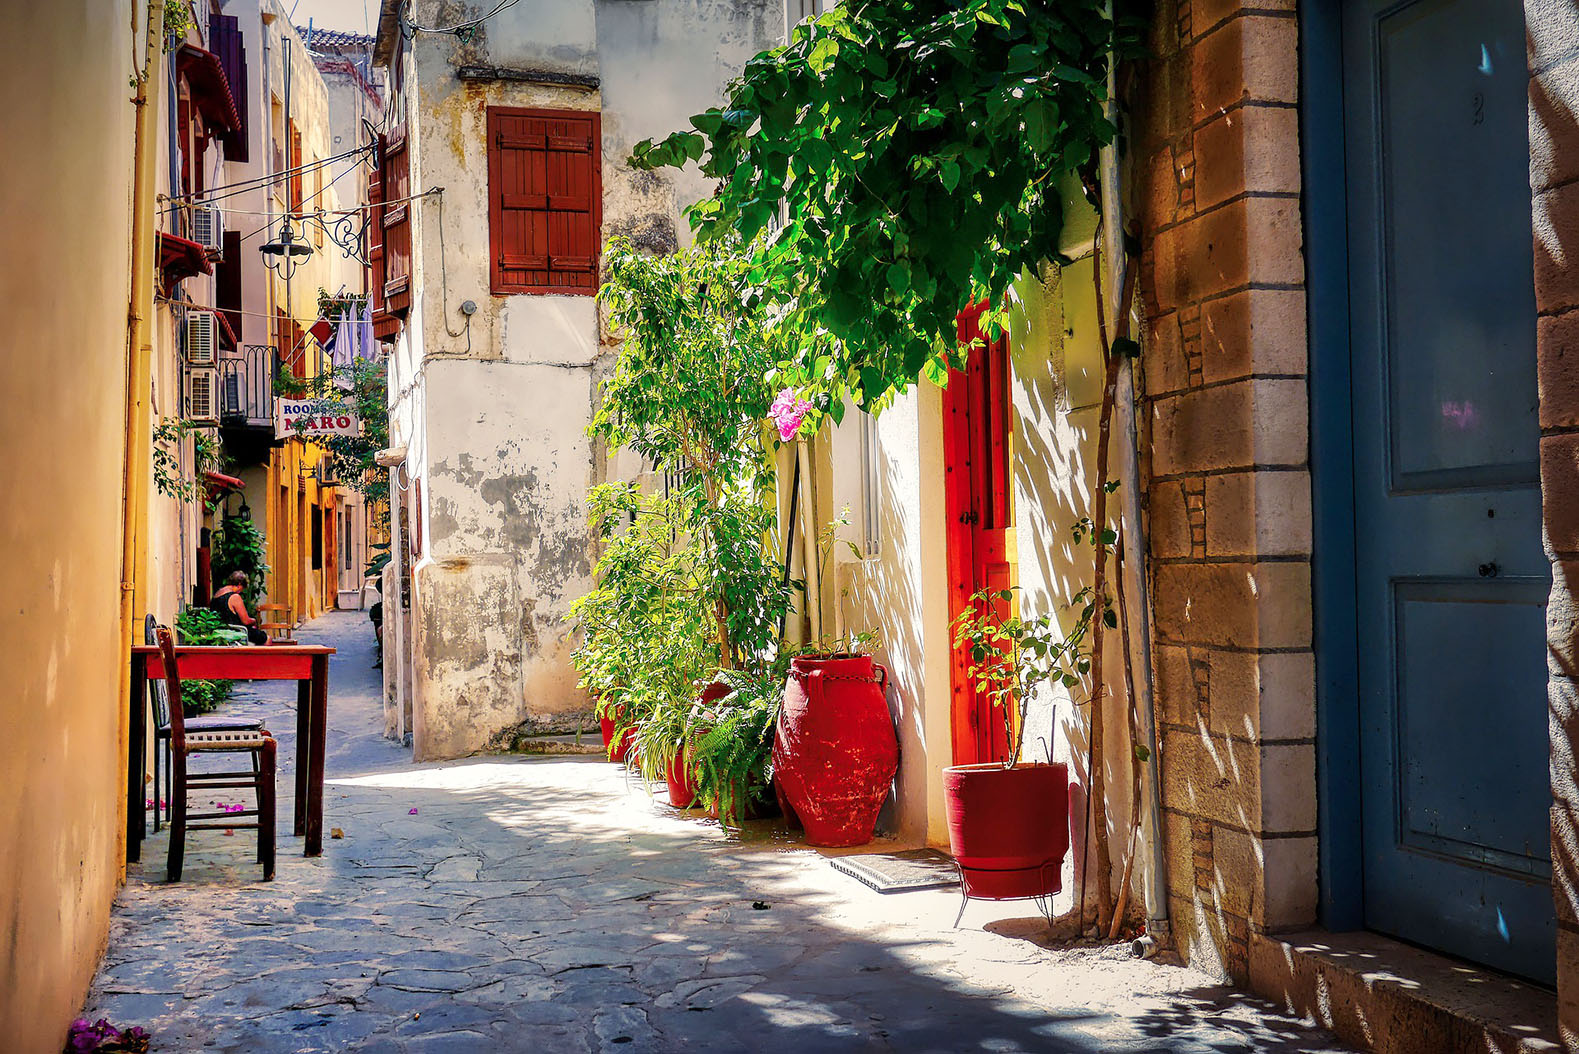 Alleyway in Chania, Crete